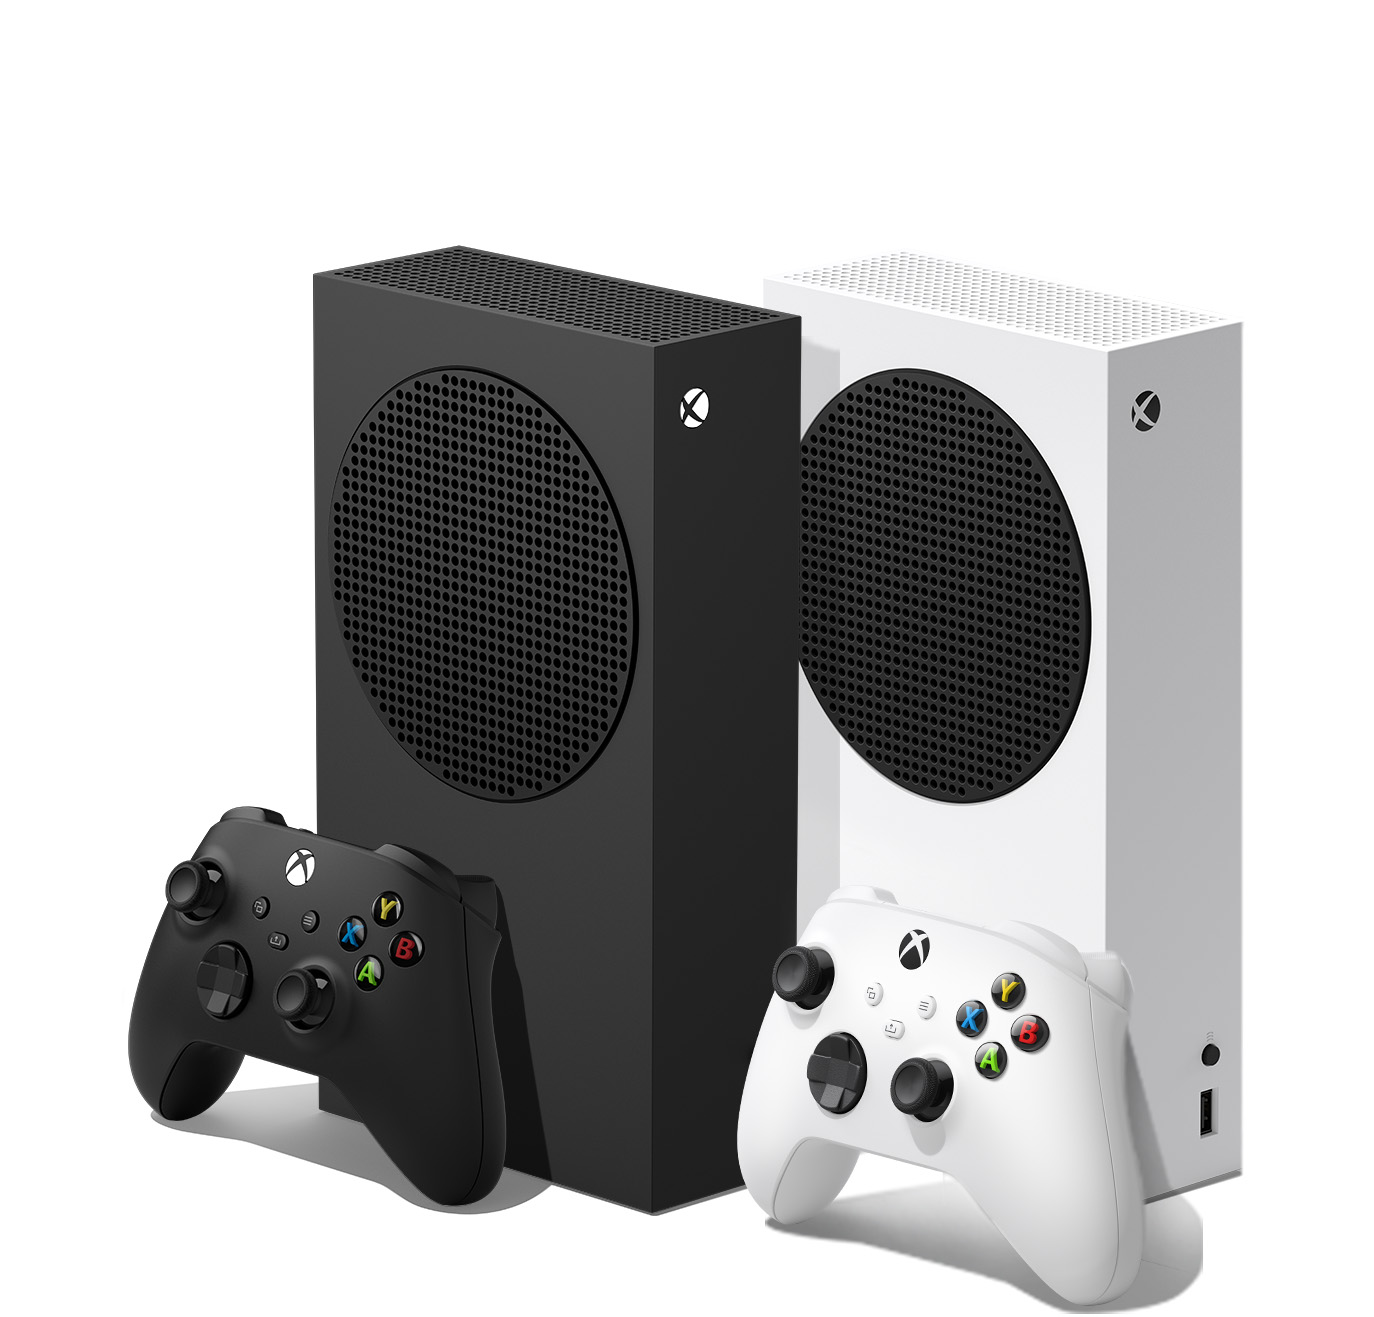 Xbox Series S and Xbox Series S 1 TB – Black console and controller